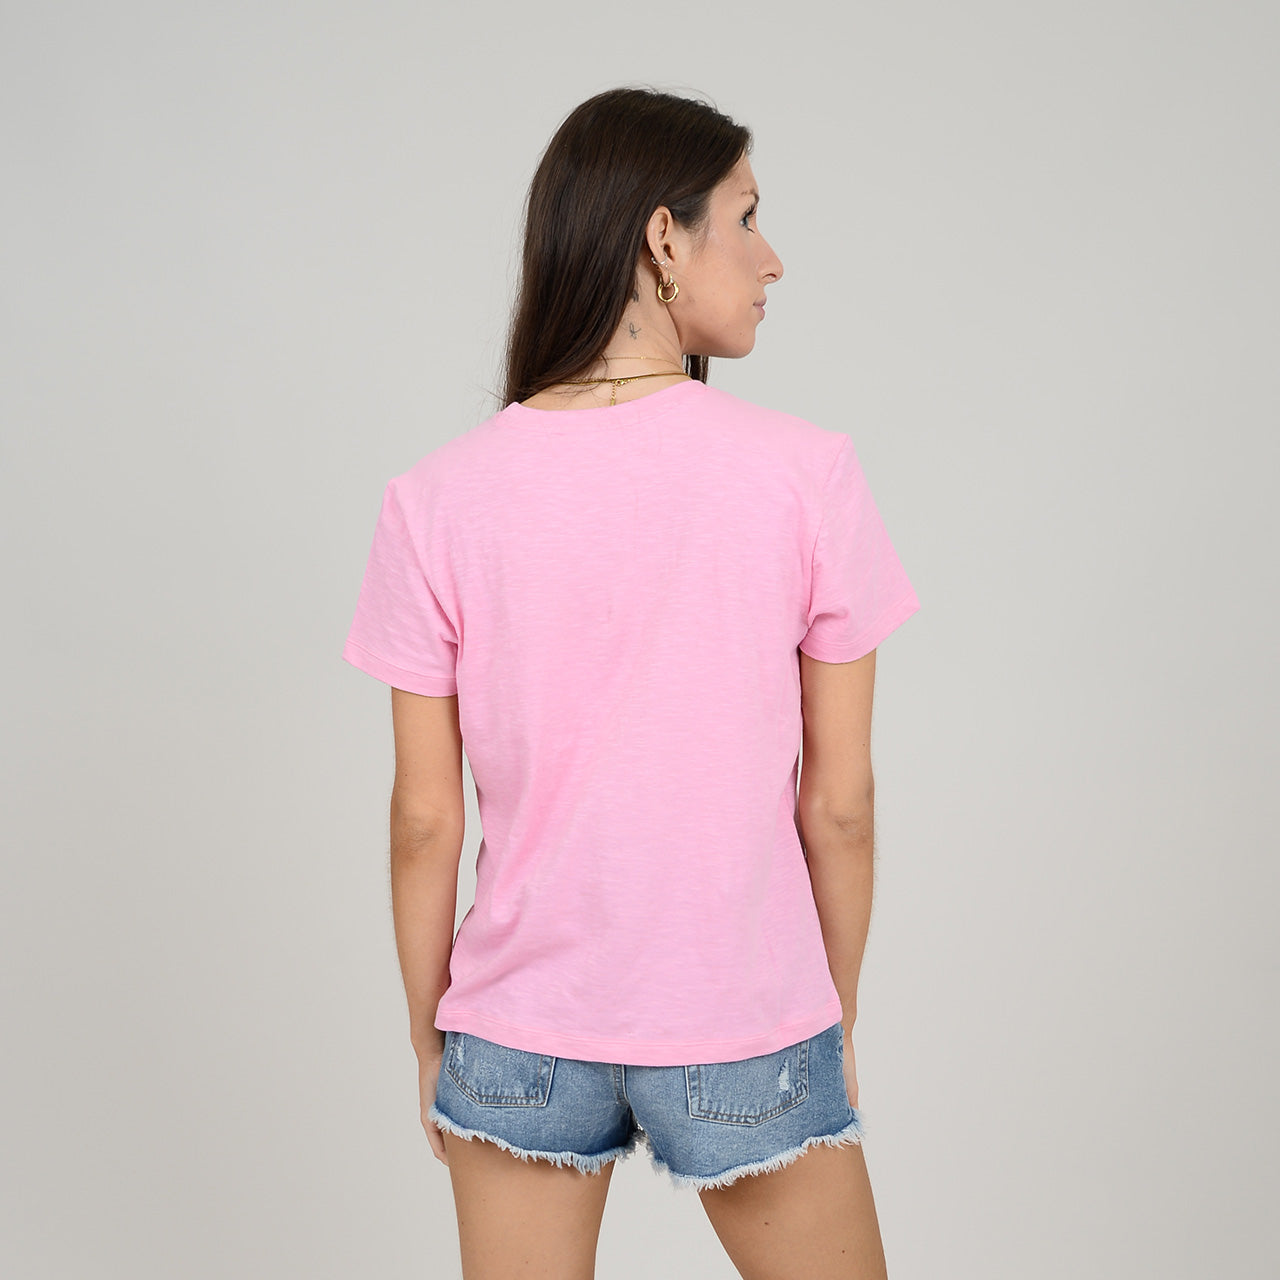 OLIVIANNA TEE- cotton candy, white or black